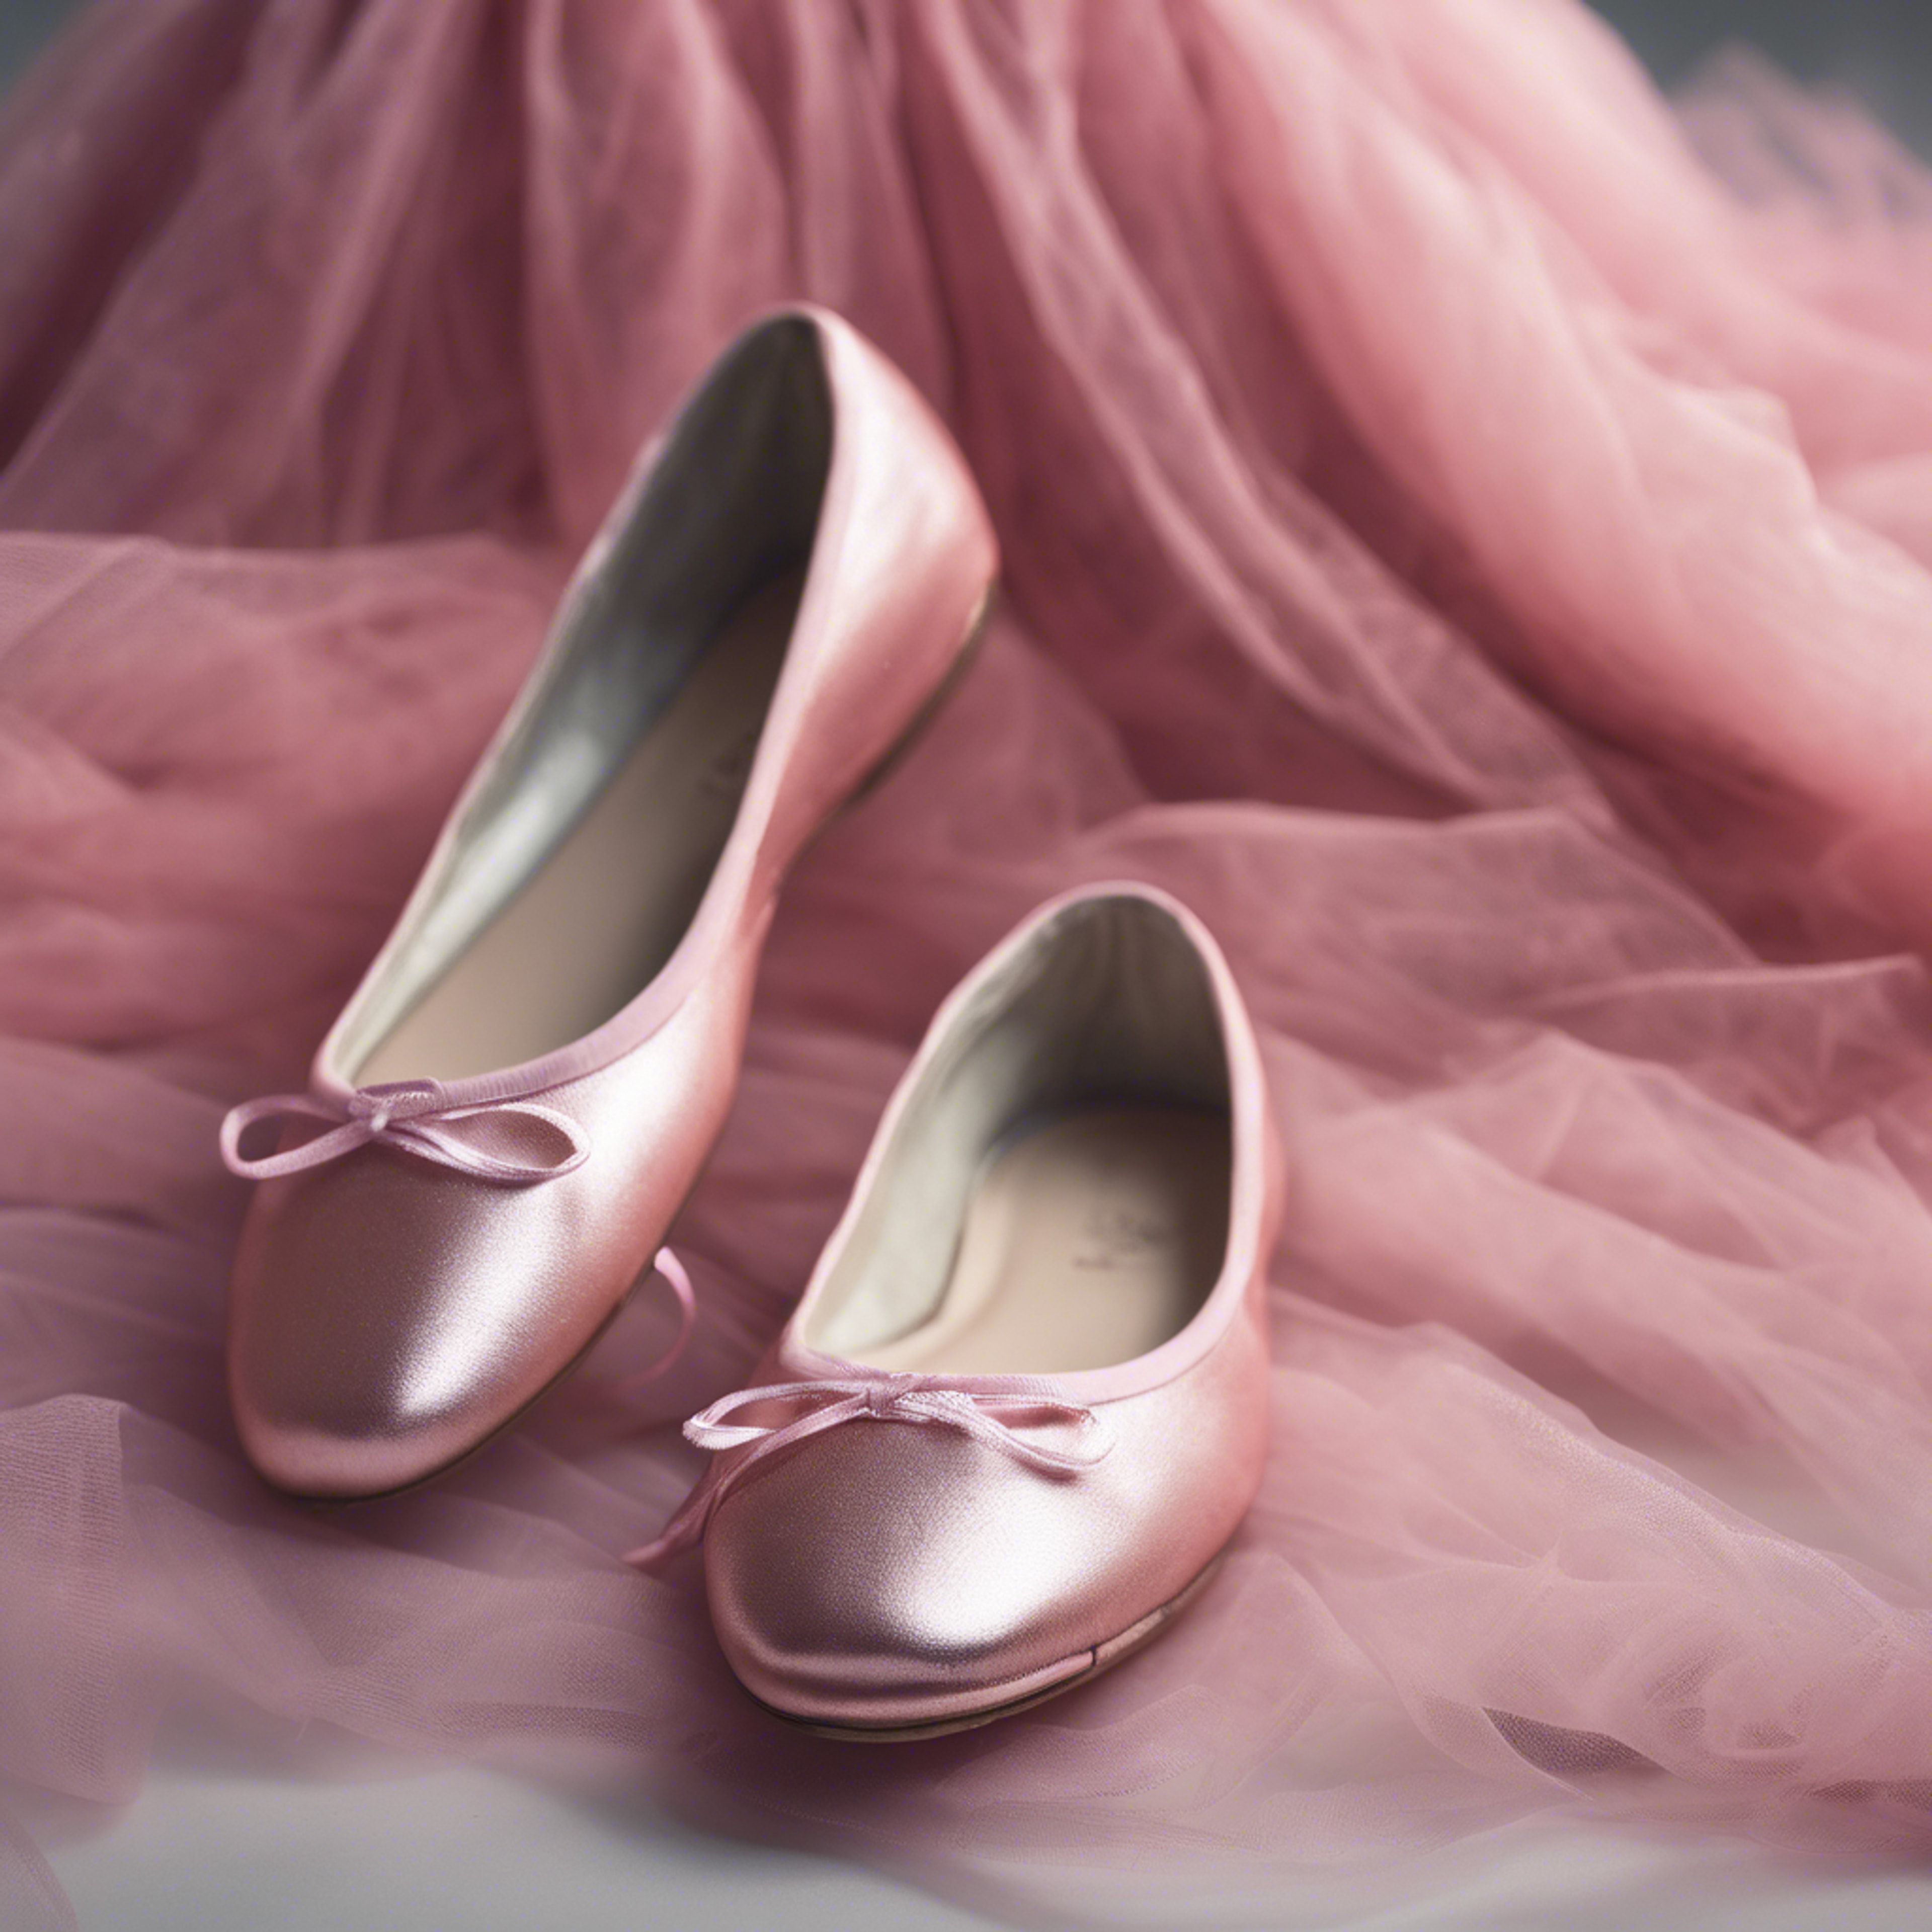 A pair of shiny ballet flats next to a pink tulle ballet skirt. Тапет[61612bb497ed40a6bca1]